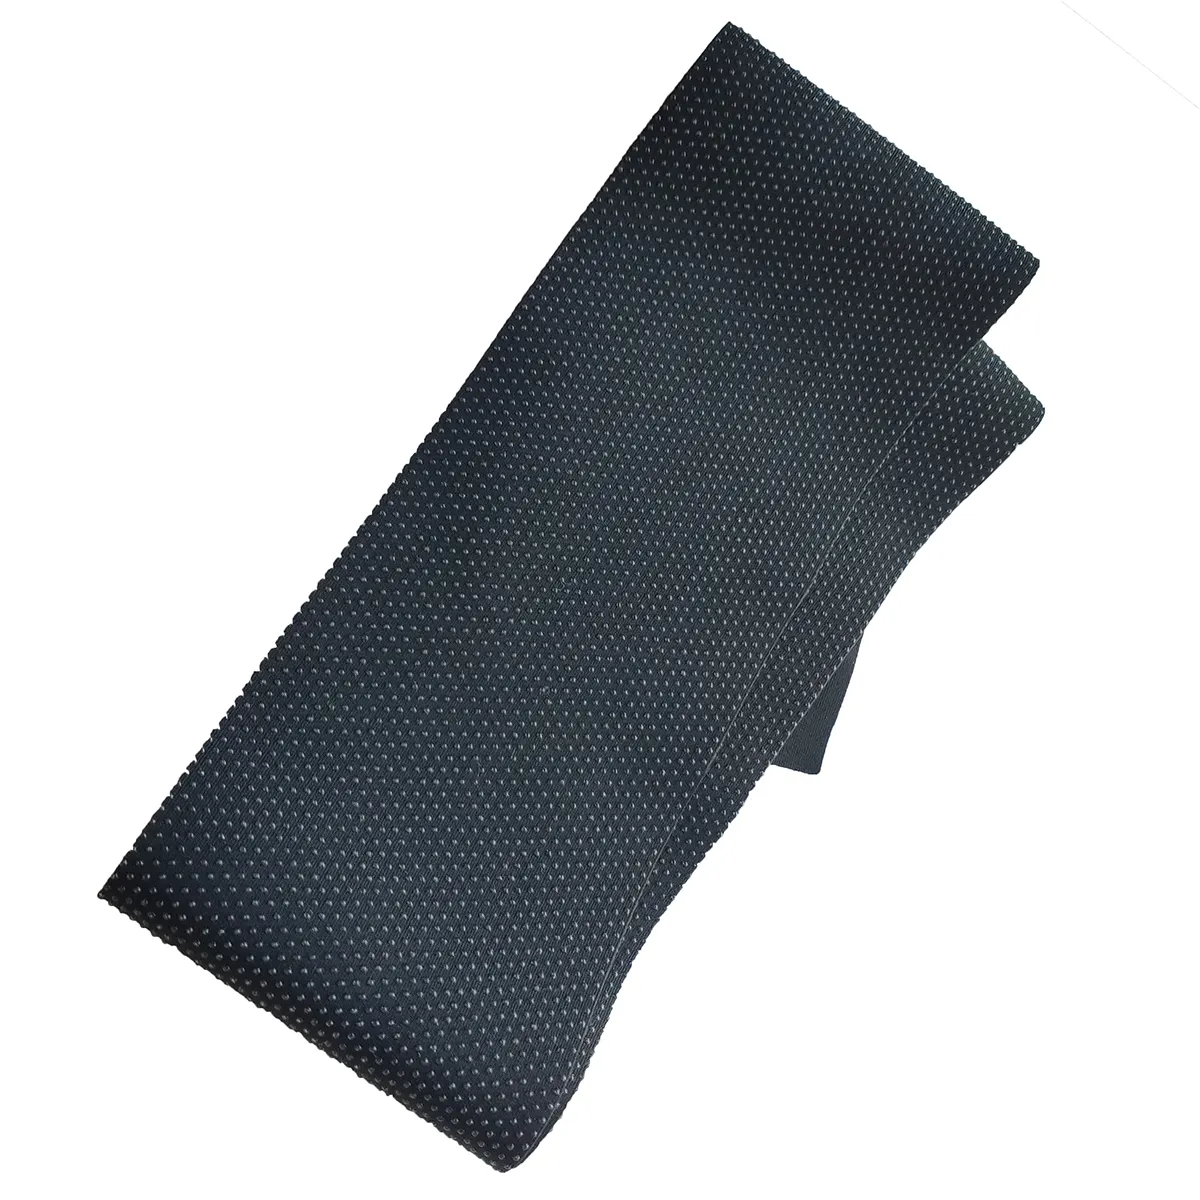 Anti-slip Silicone coated printed Nylon spandex 4 ways stretchy non-slip fabric for sports wear